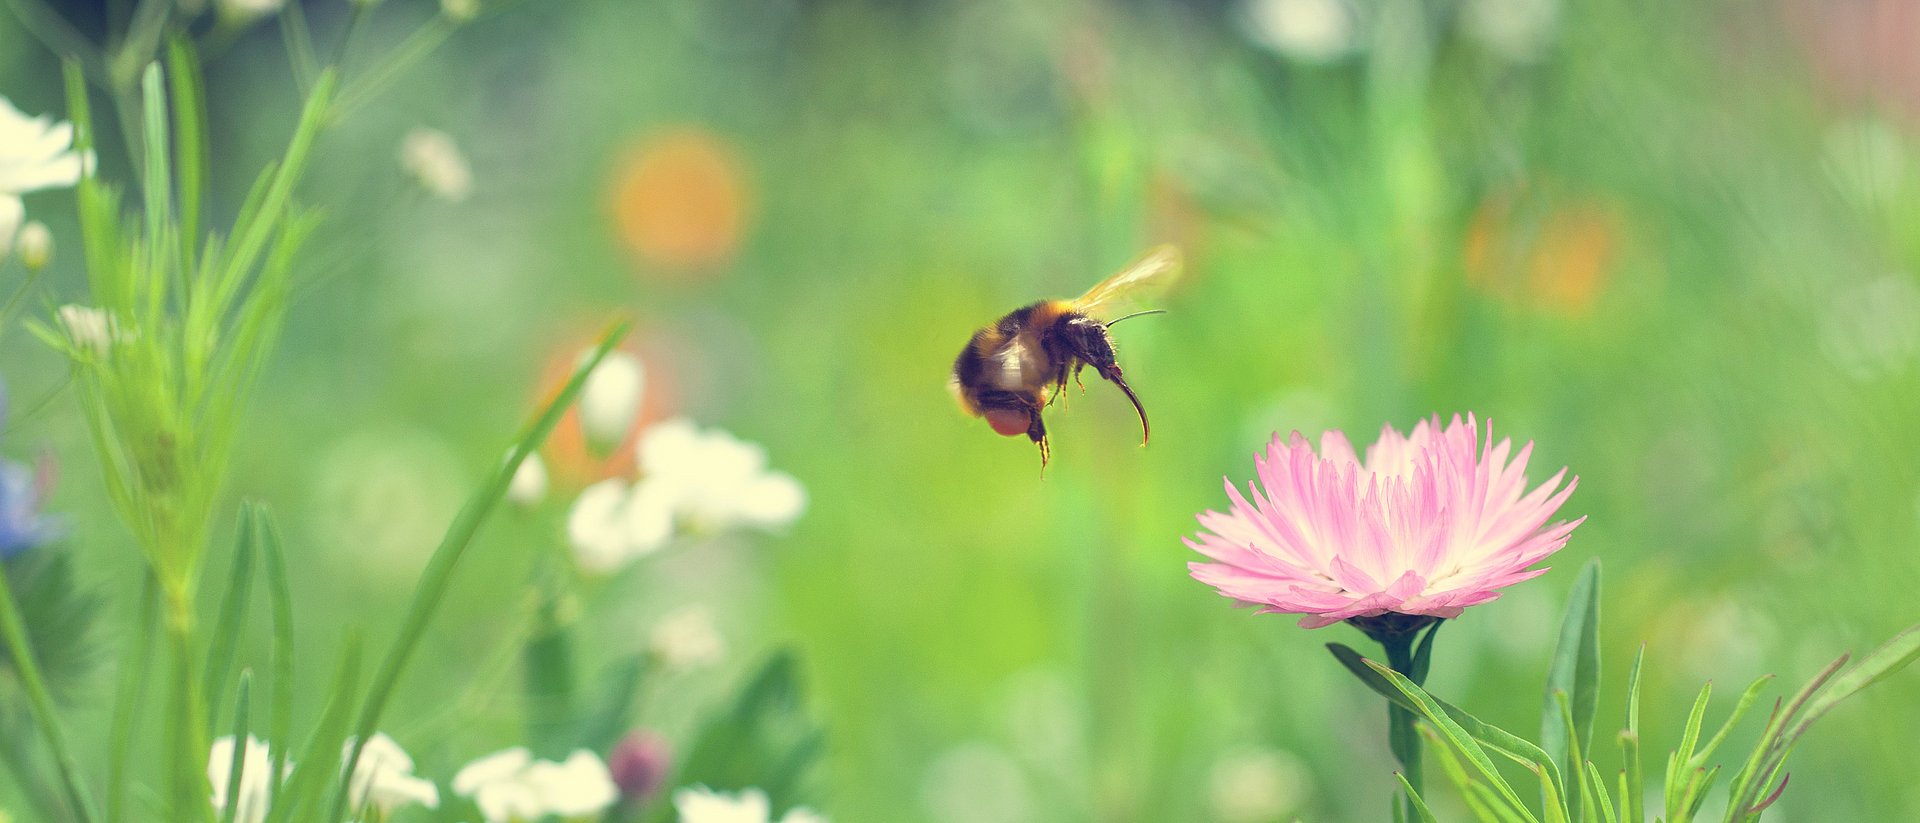 A bumblebee approaching a blossom.